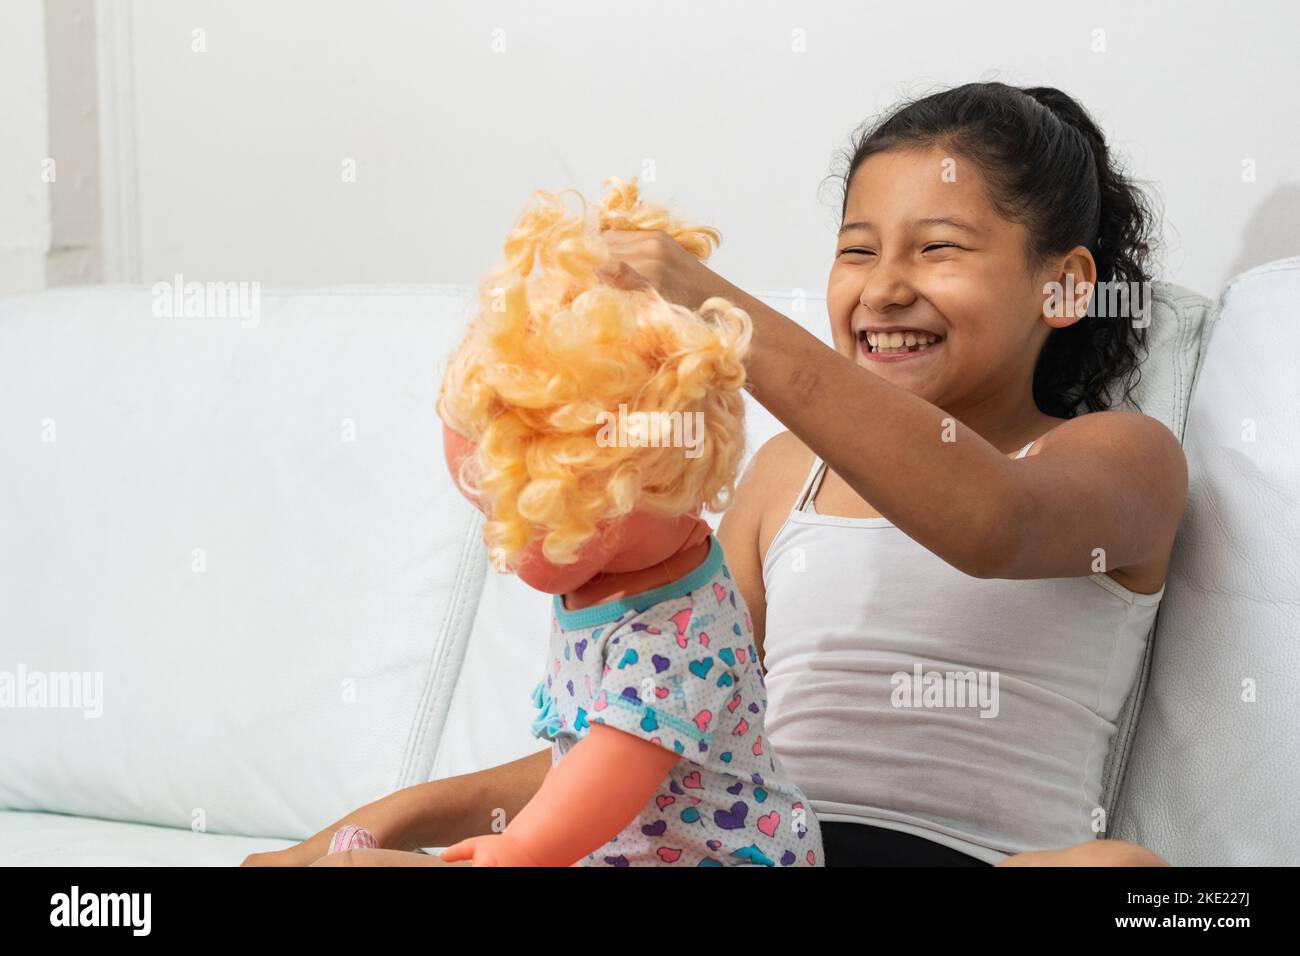 latina girl with a big smile, playing with her doll on the sofa. brunette combing her toy. Stock Photo